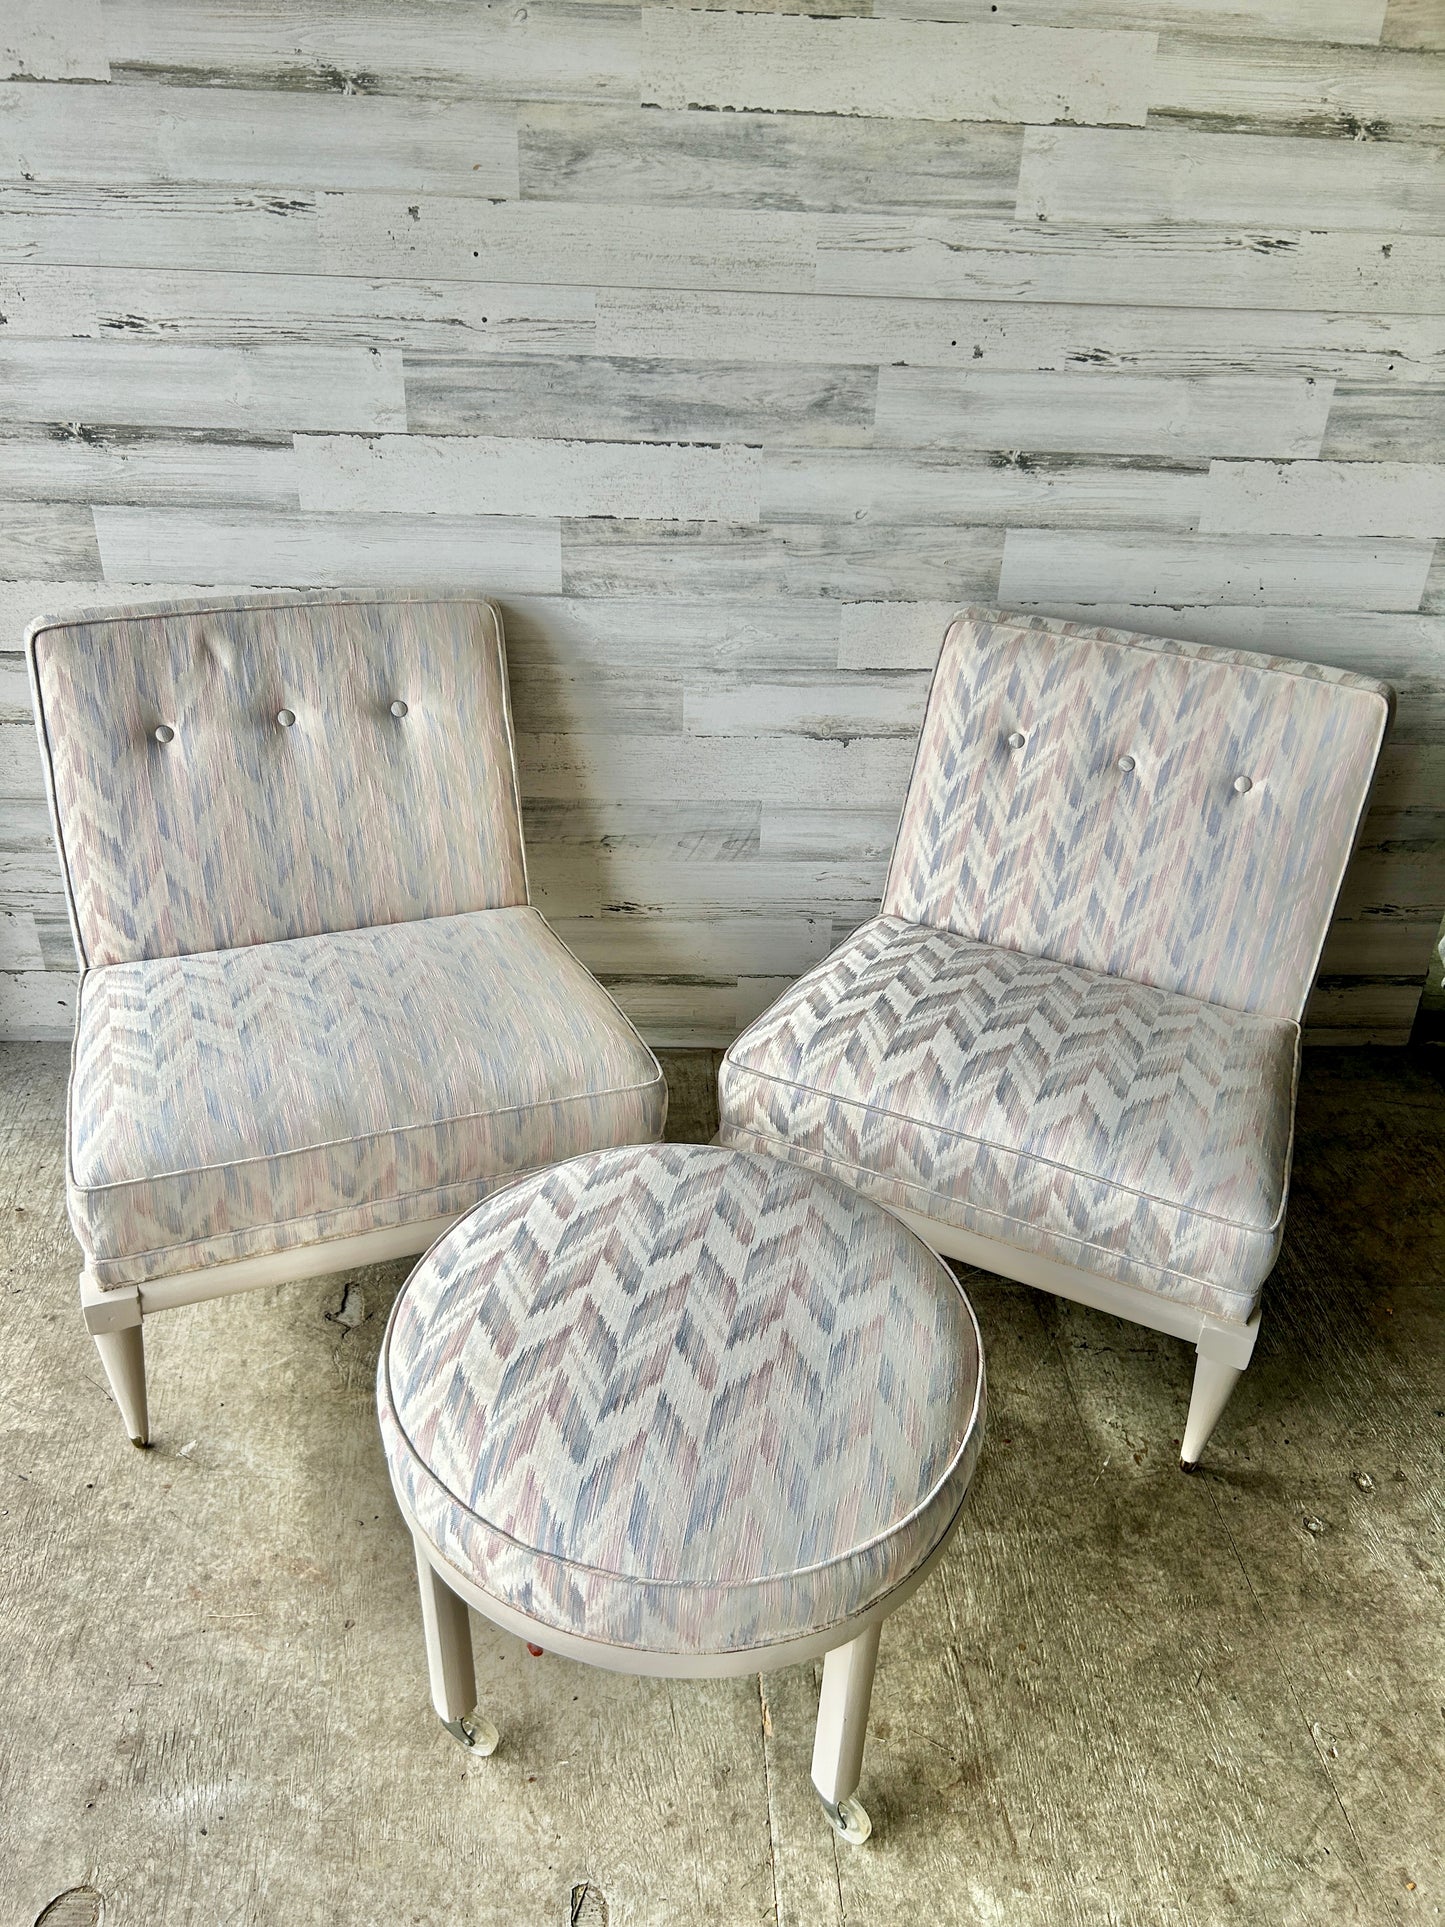 Vintage Mid Century Modern Set of Chairs with Ottoman